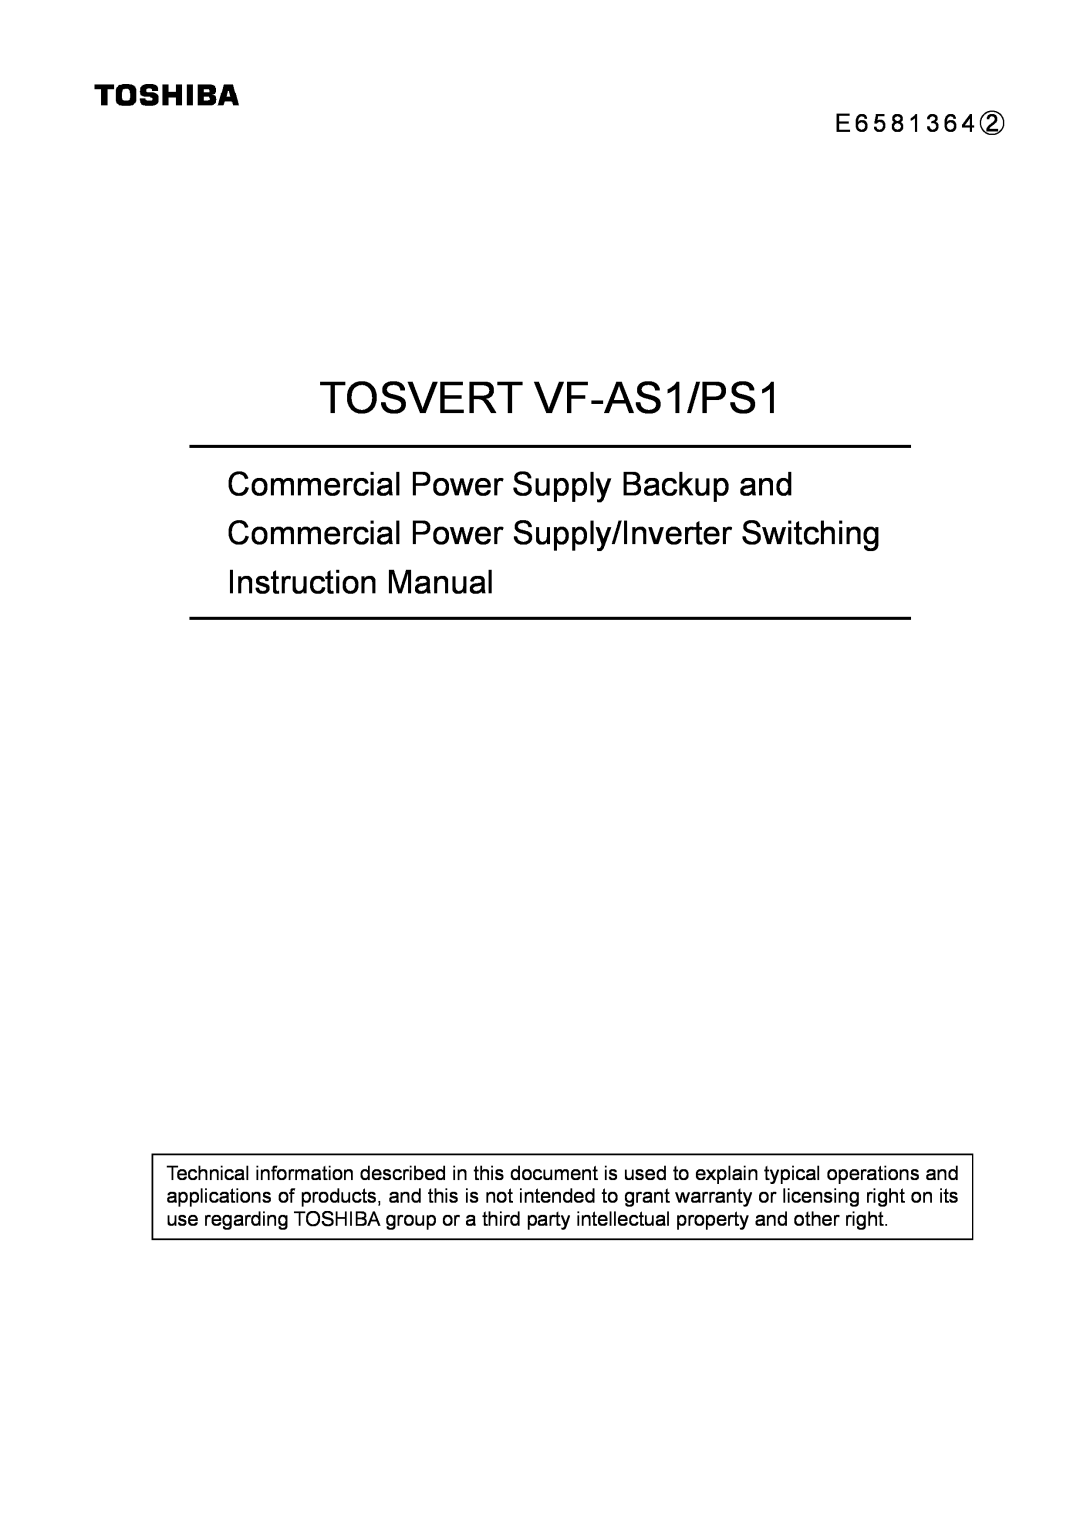 Toshiba VF-PS1 instruction manual Commercial Power Supply Backup and, E 6 5 8 1 3 6 4 ②, TOSVERT VF-AS1/PS1 